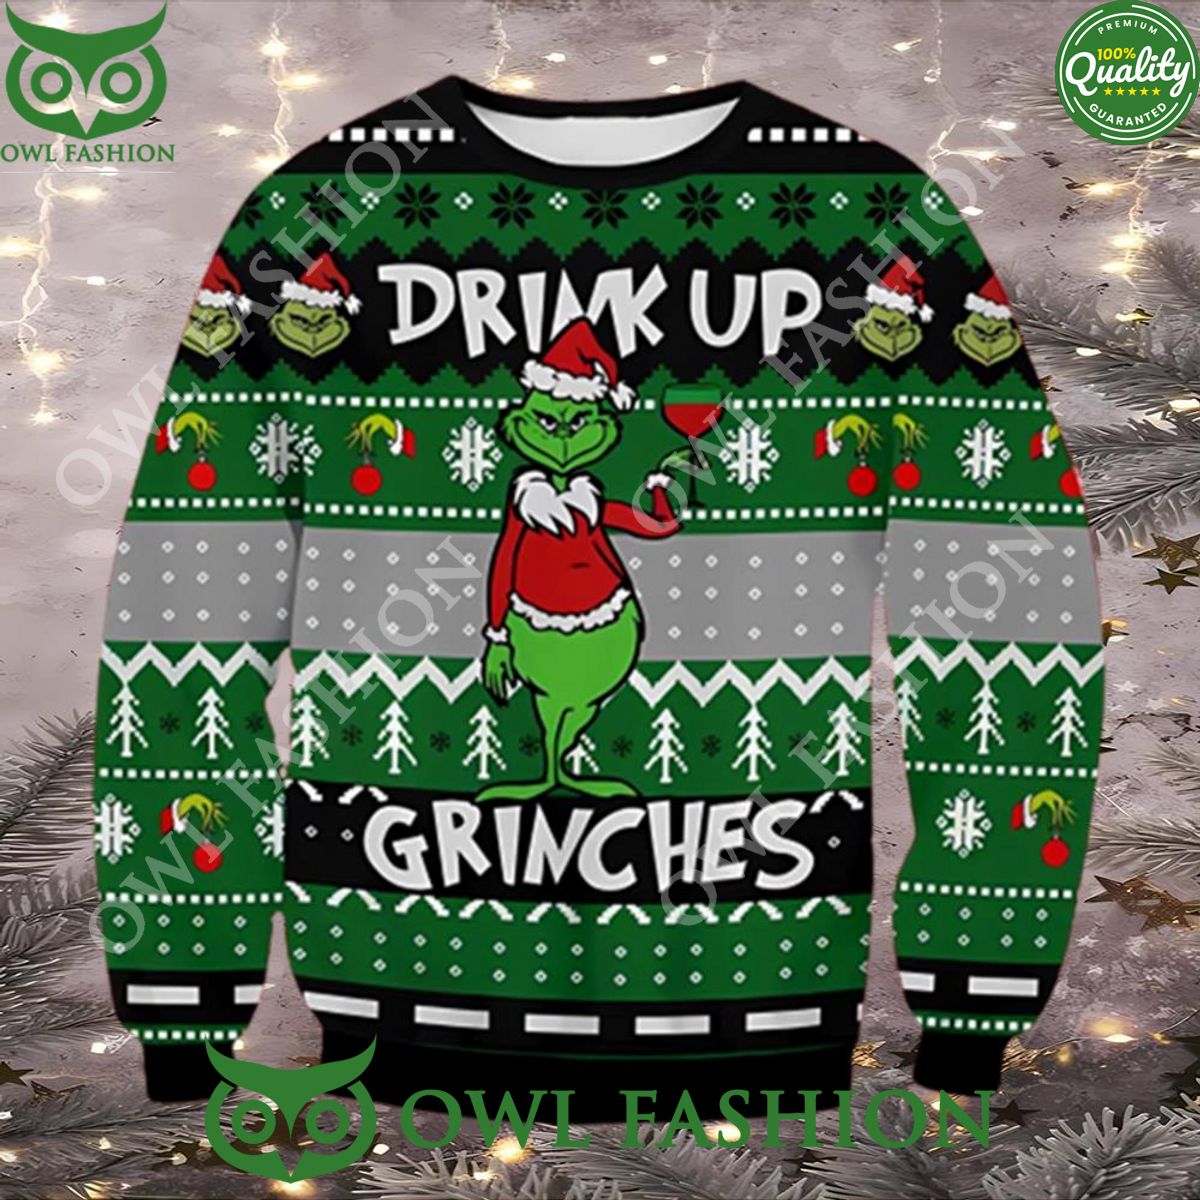 Drink Up Grinch Premium Ugly Christmas Sweater Jumper Good look mam